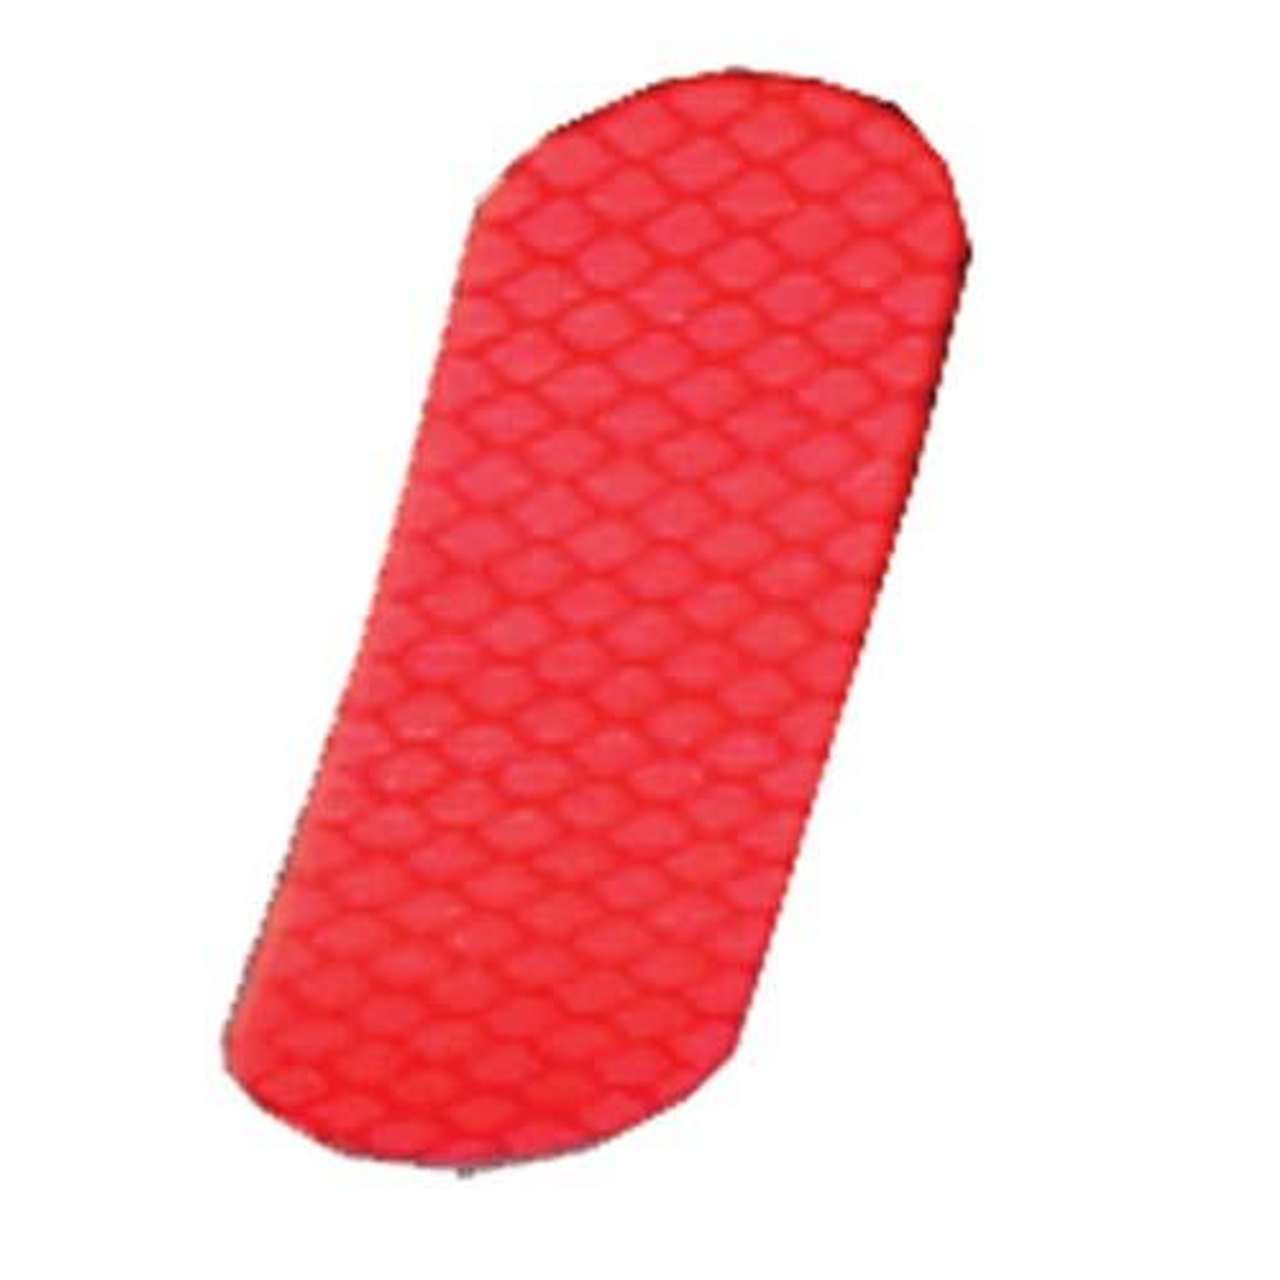 Ezgo RXV red side reflector -driver-2009 up, 31654